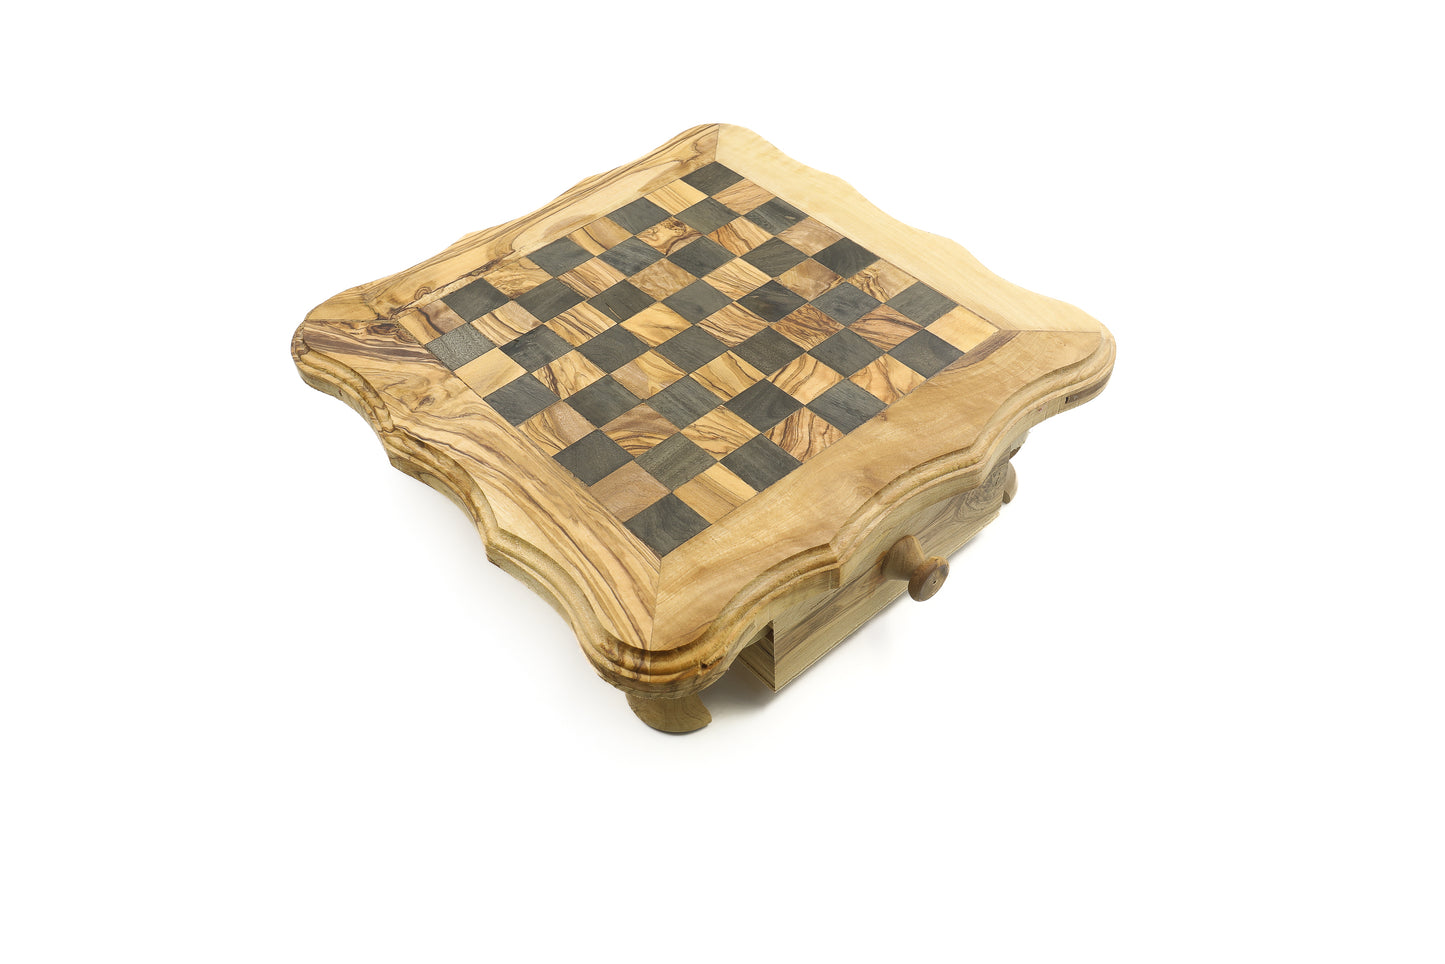 Olive wood chess set featuring an elegant board and handcrafted pieces